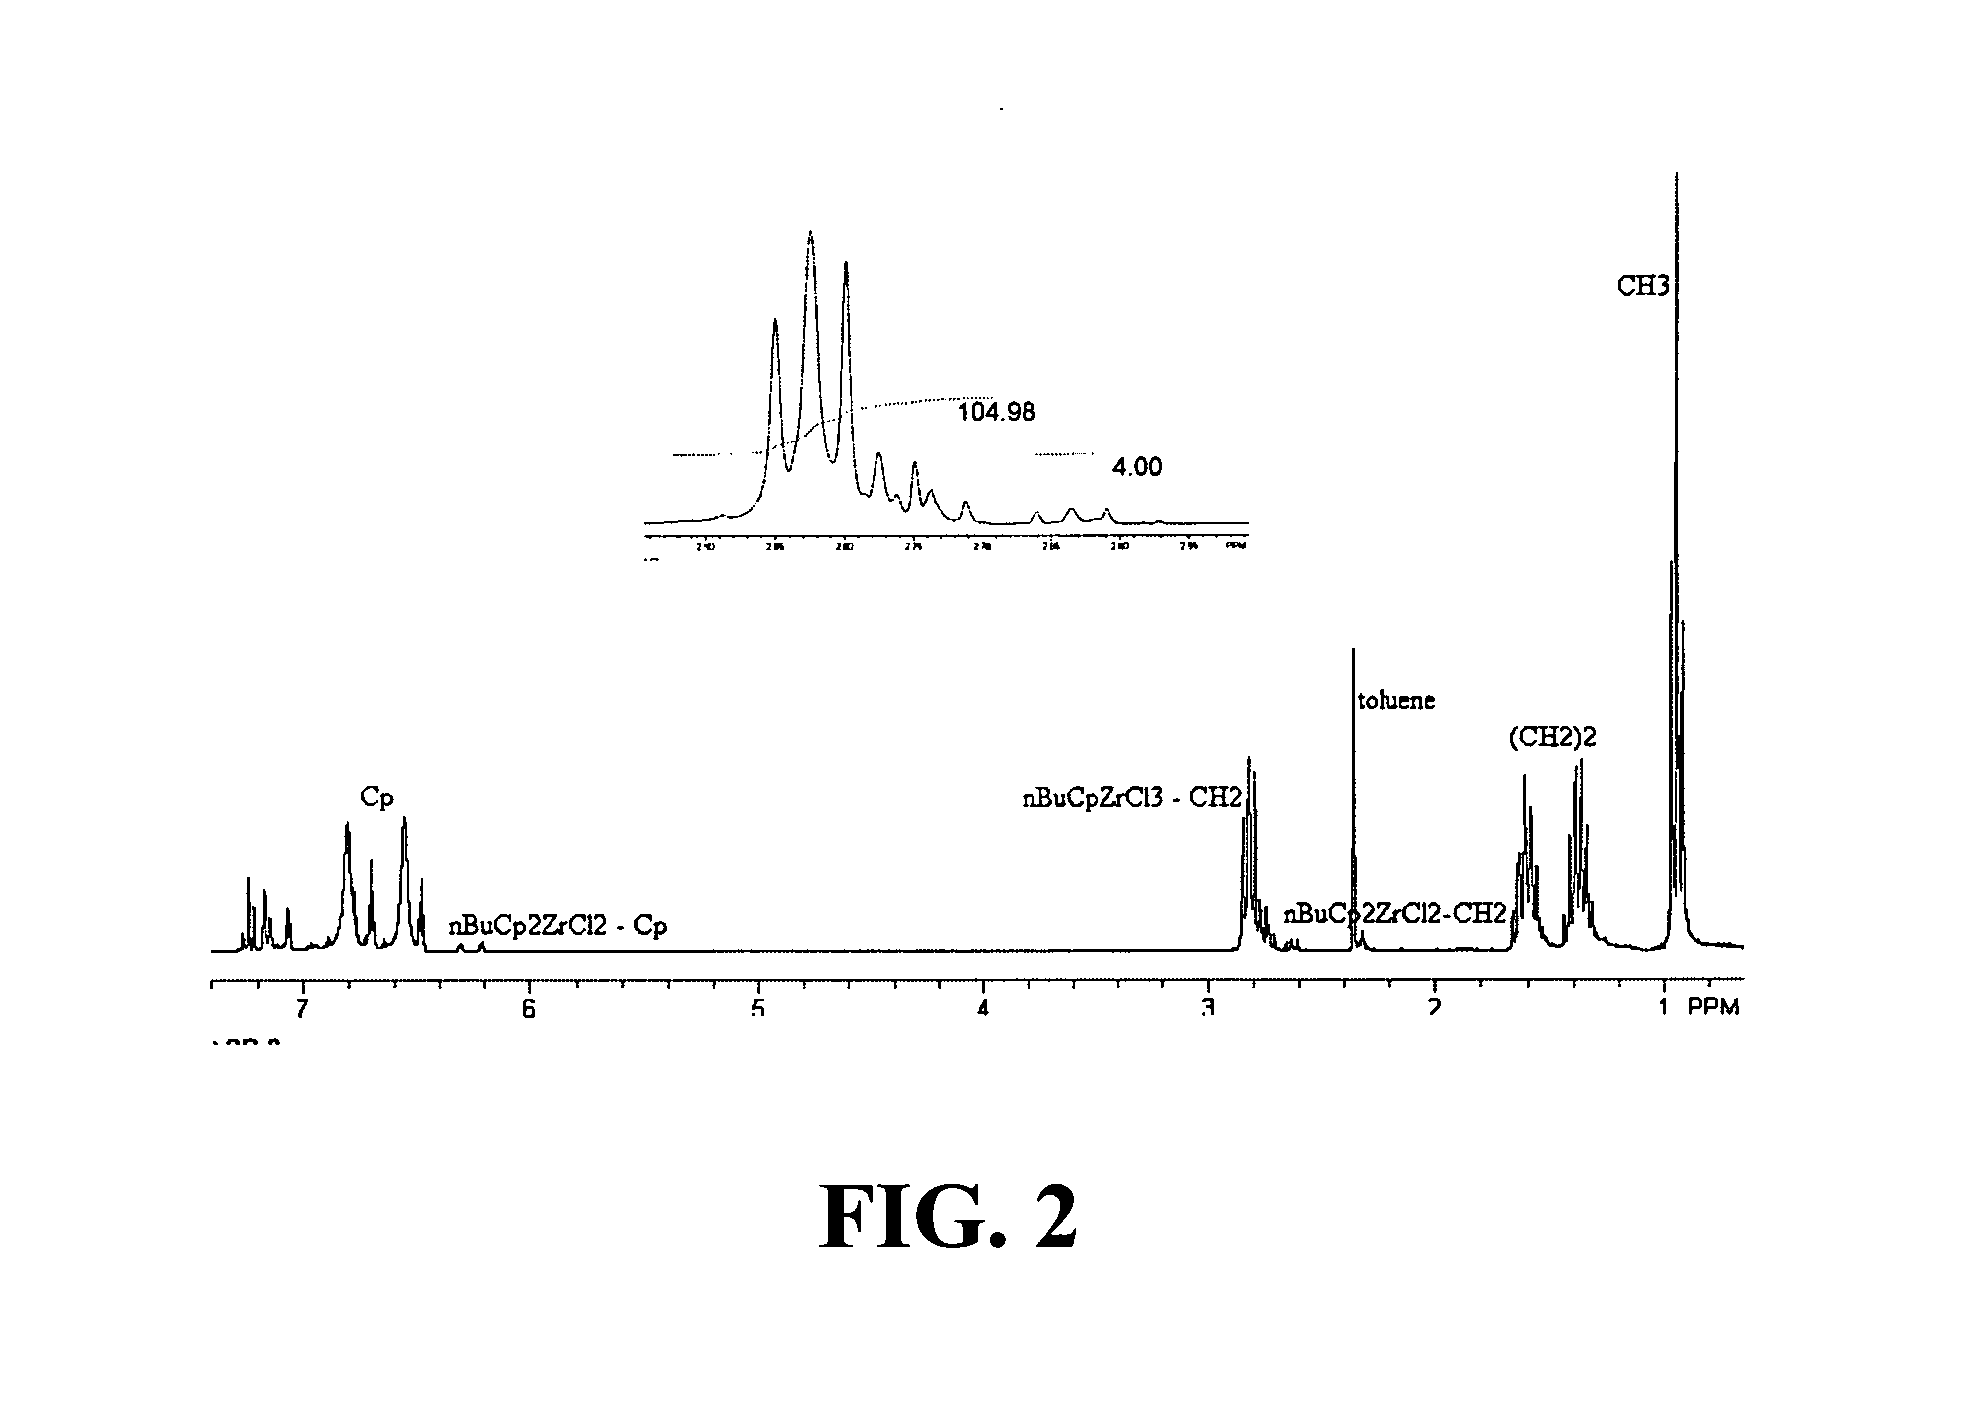 Polymerization catalysts and process for producing bimodal polymers in a single reactor